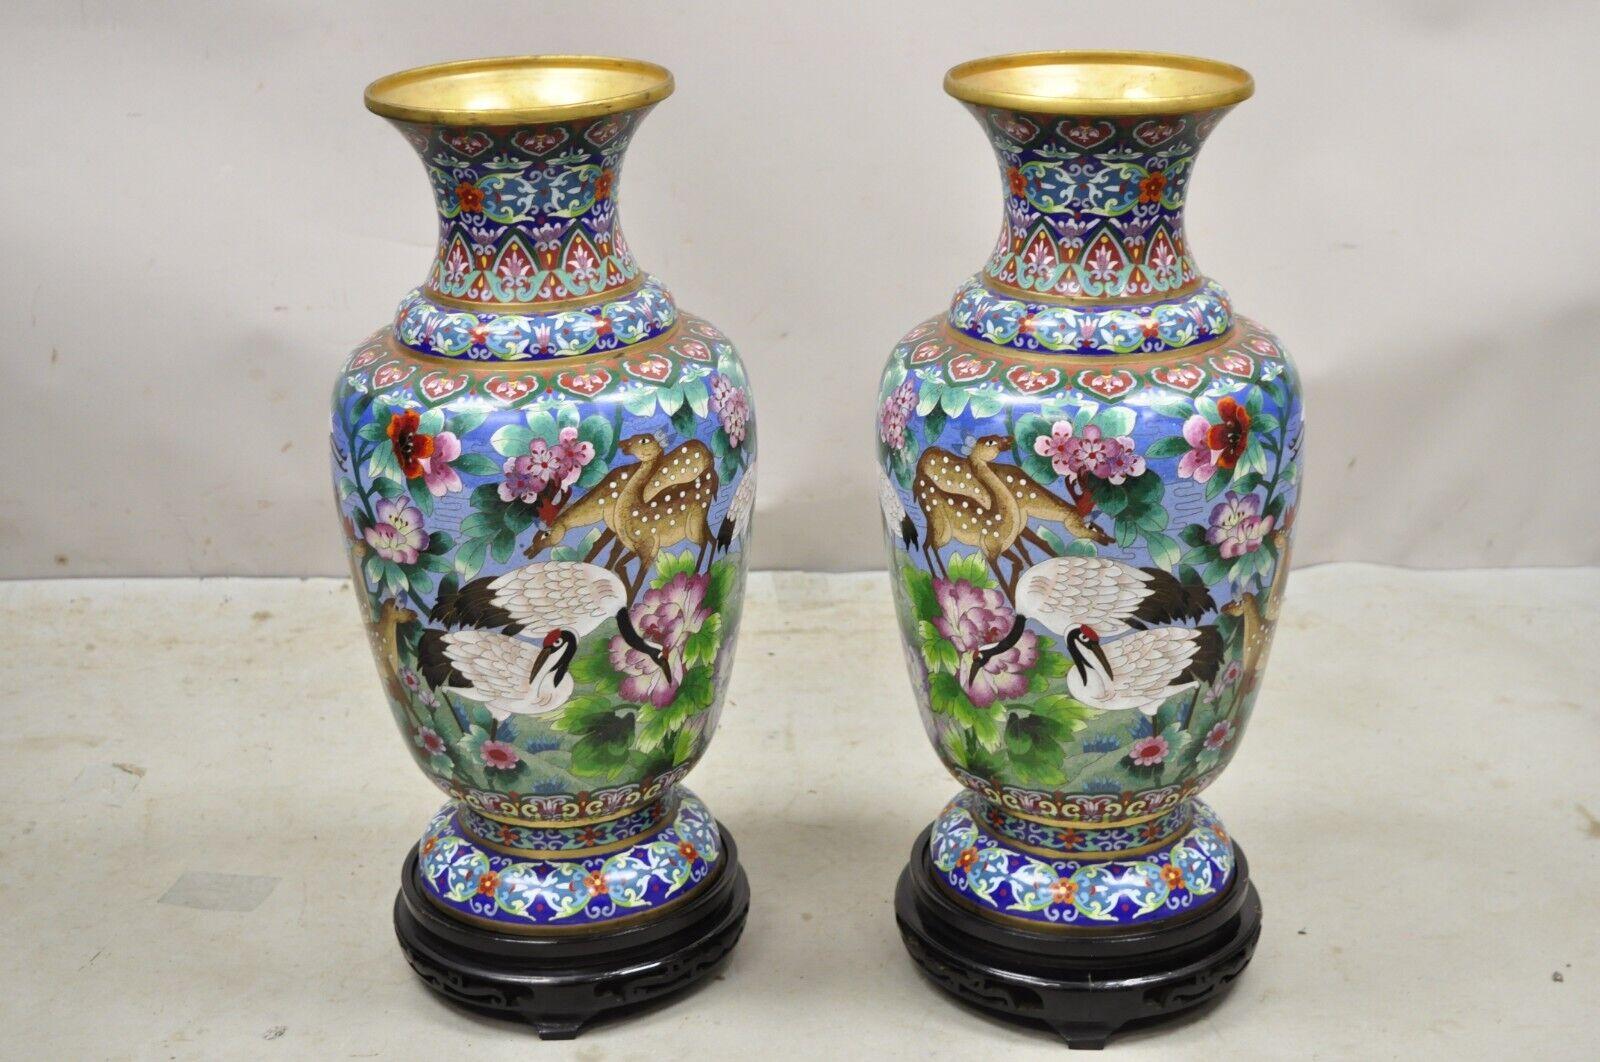 Vintage Chinese Cloisonné Porcelain Enamel Figural Crane and Deer Vase - a Pair. Item features a removable carved wooden base, crane birds, deer, and flowers throughout, large impressive size, great style and form. Circa Early to Mid 20th Century.